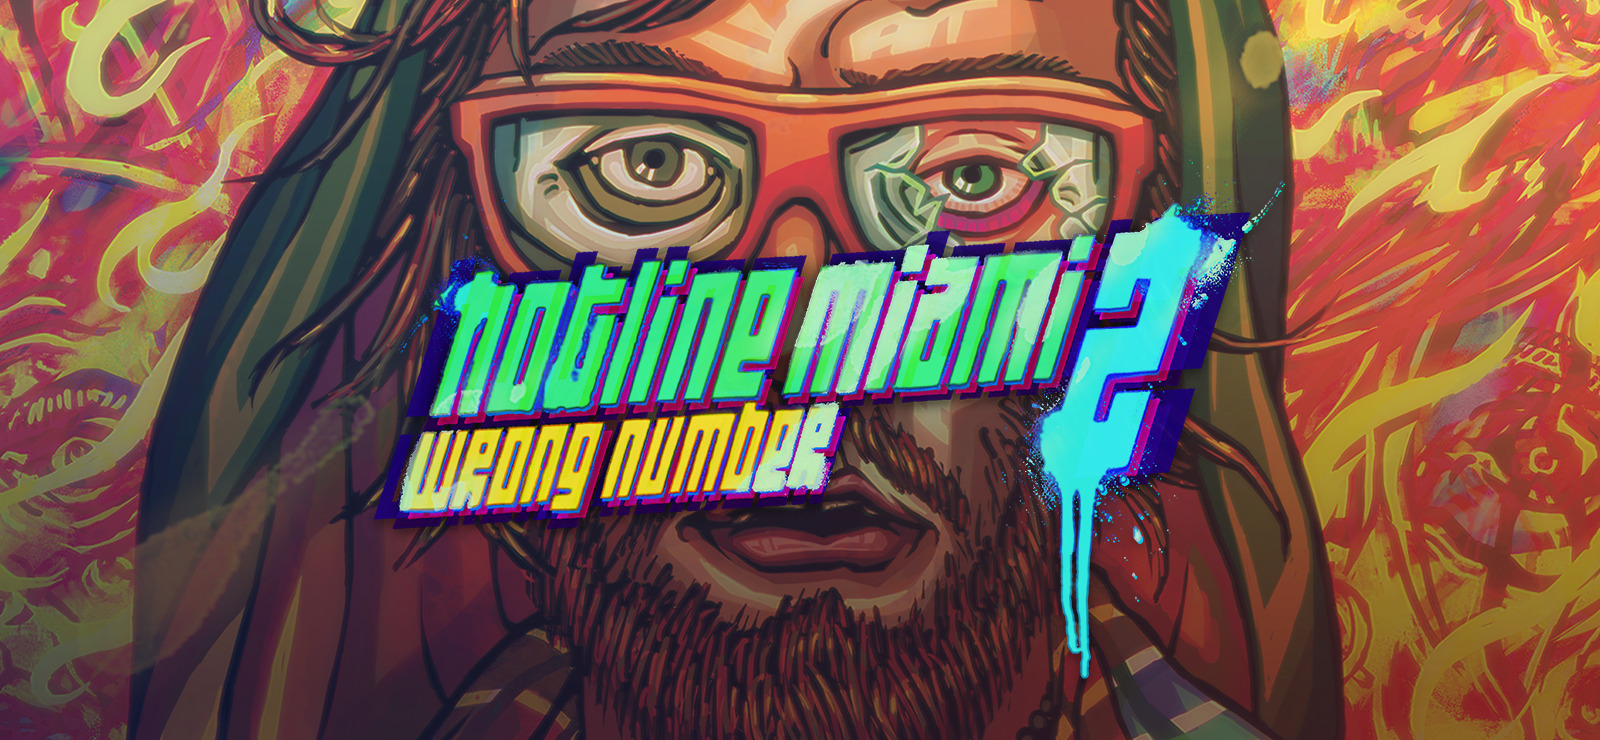 steam hotline miami 2 soundtrack shows not installed